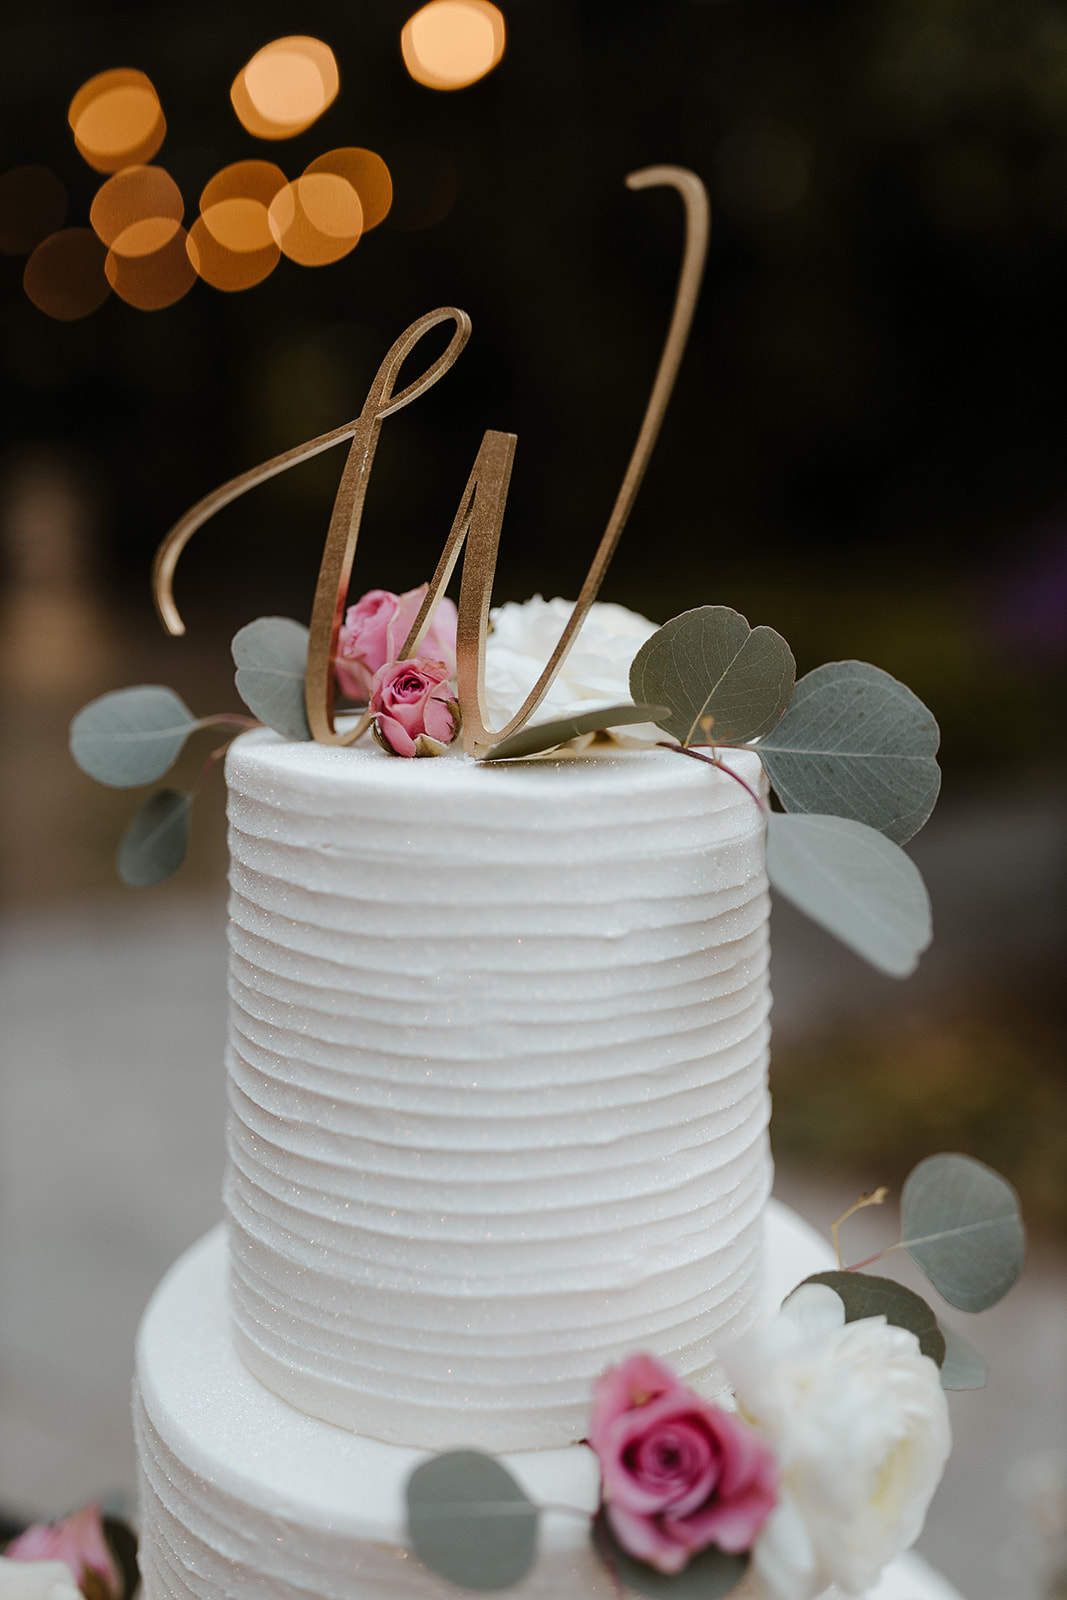 top-tier of white wedding cake with gold W cake topper